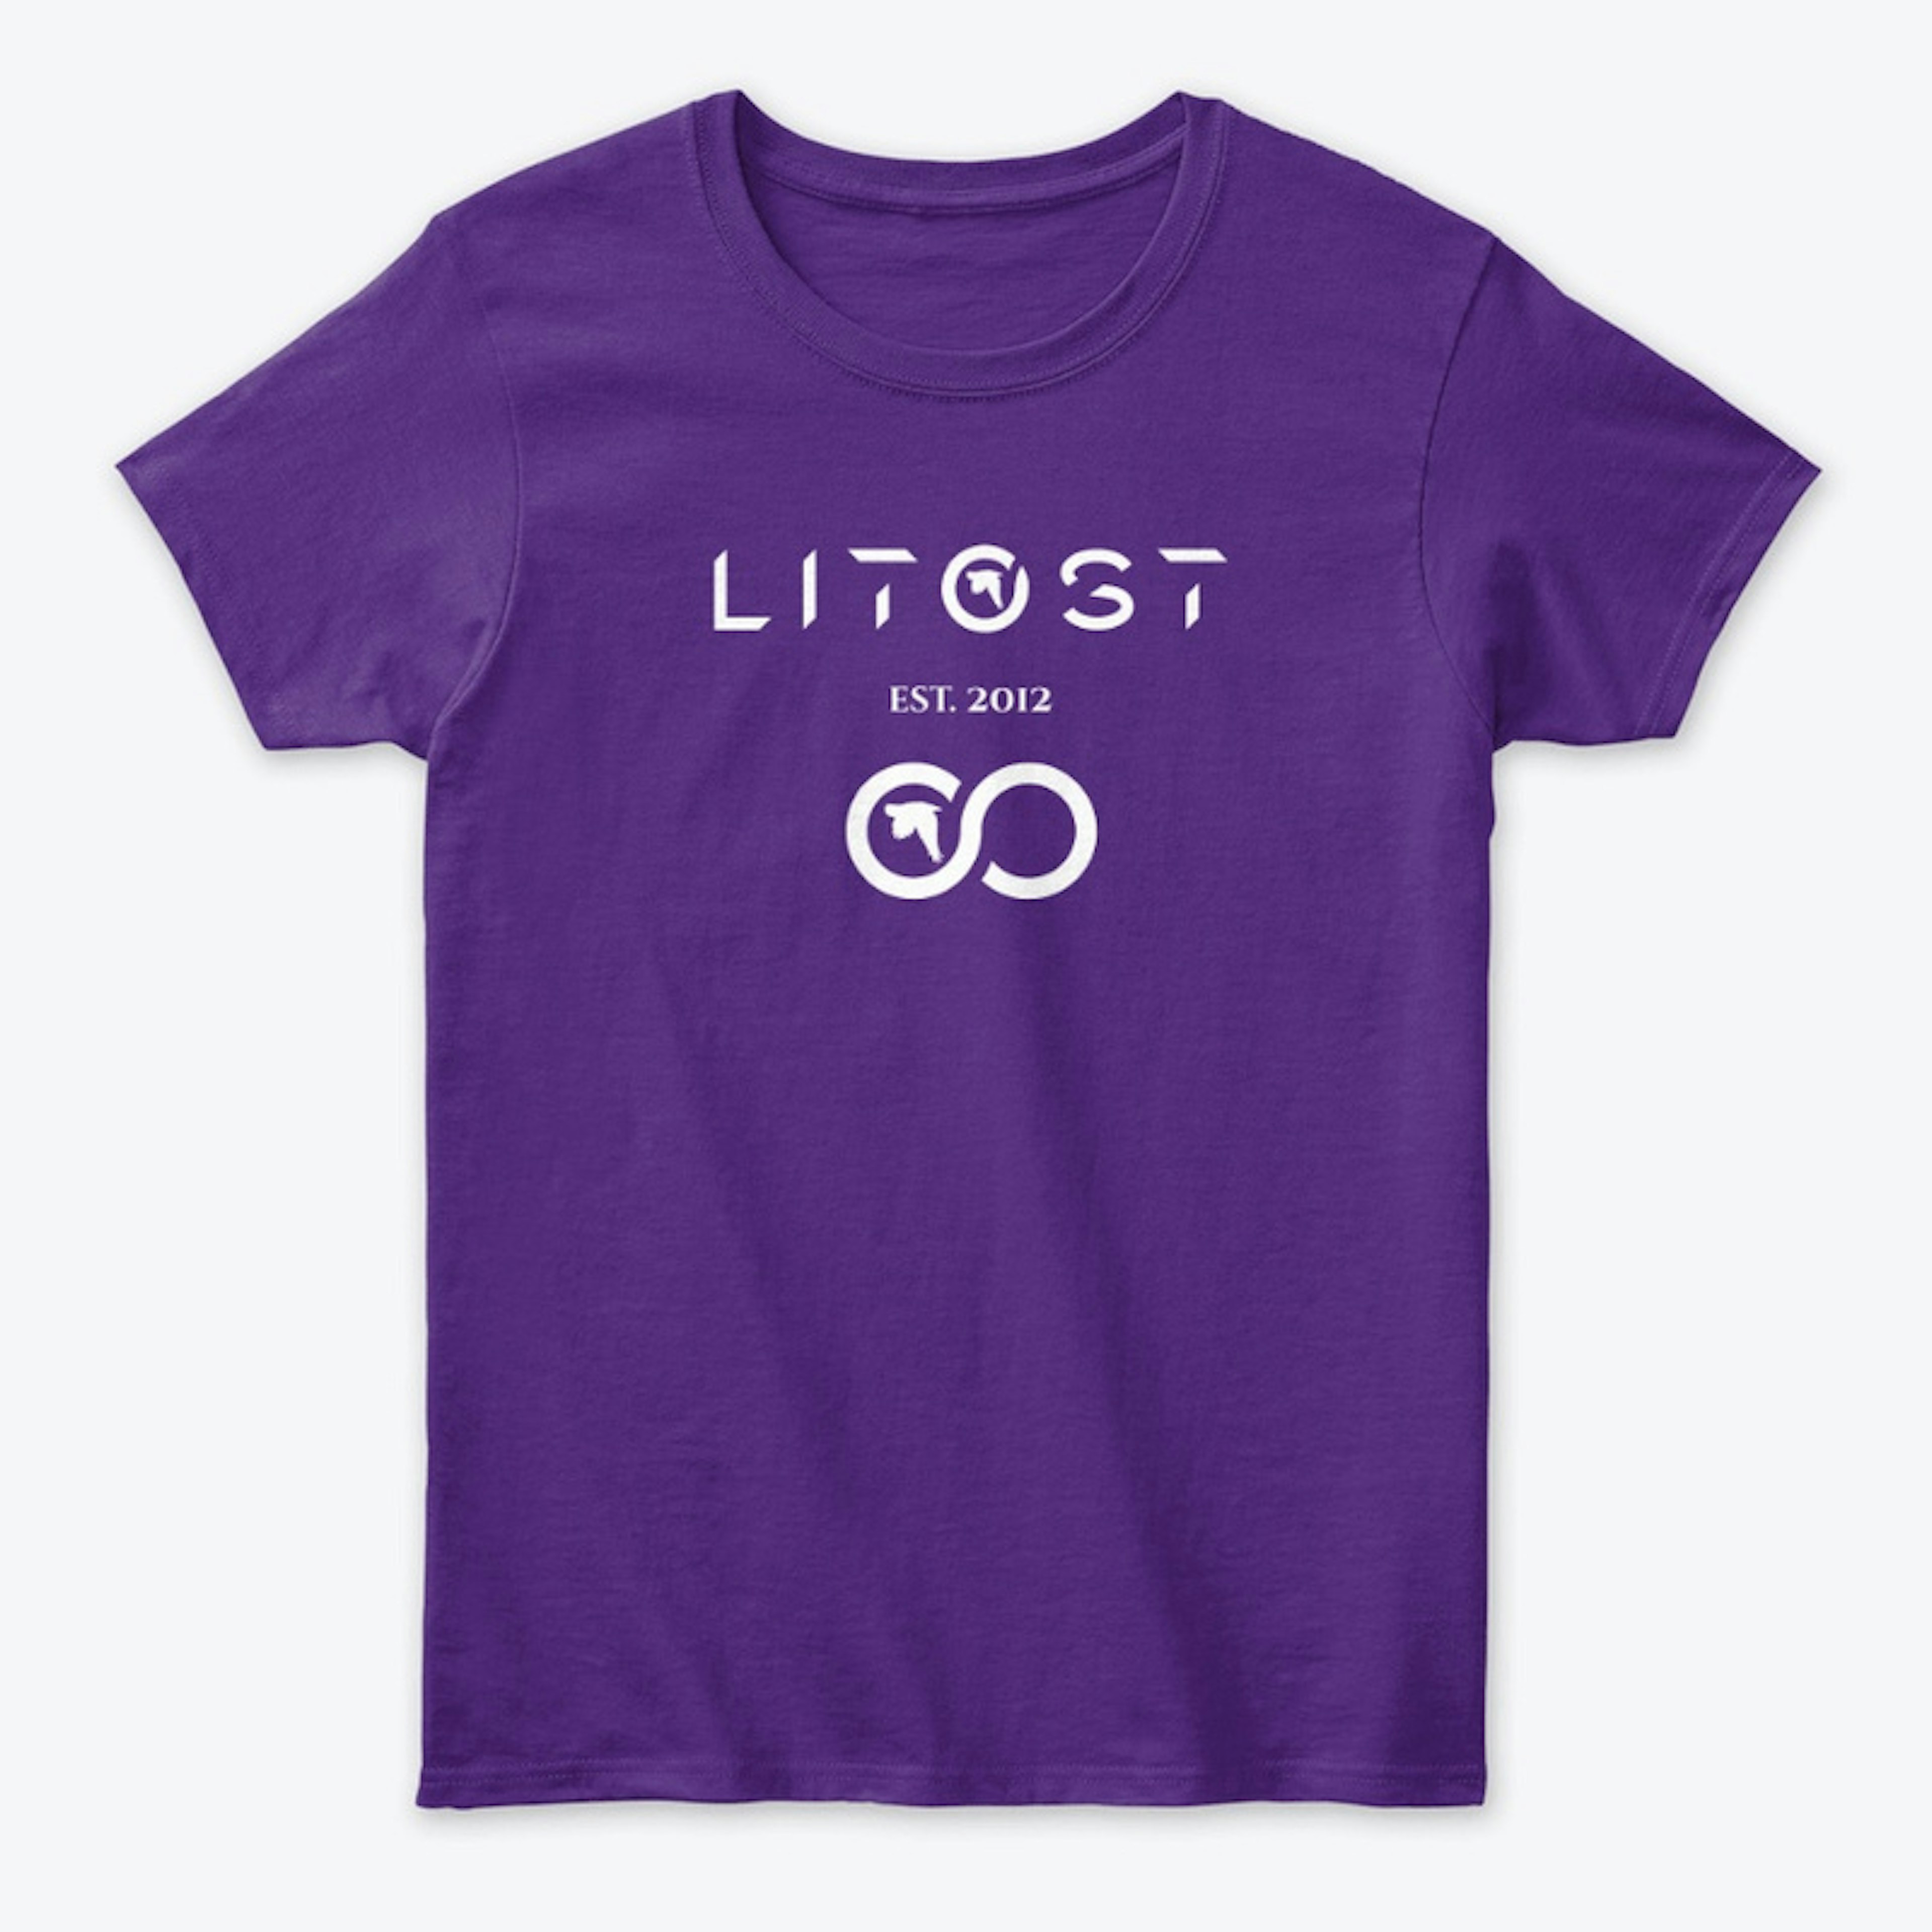 Litost 10th Anniversary Collection